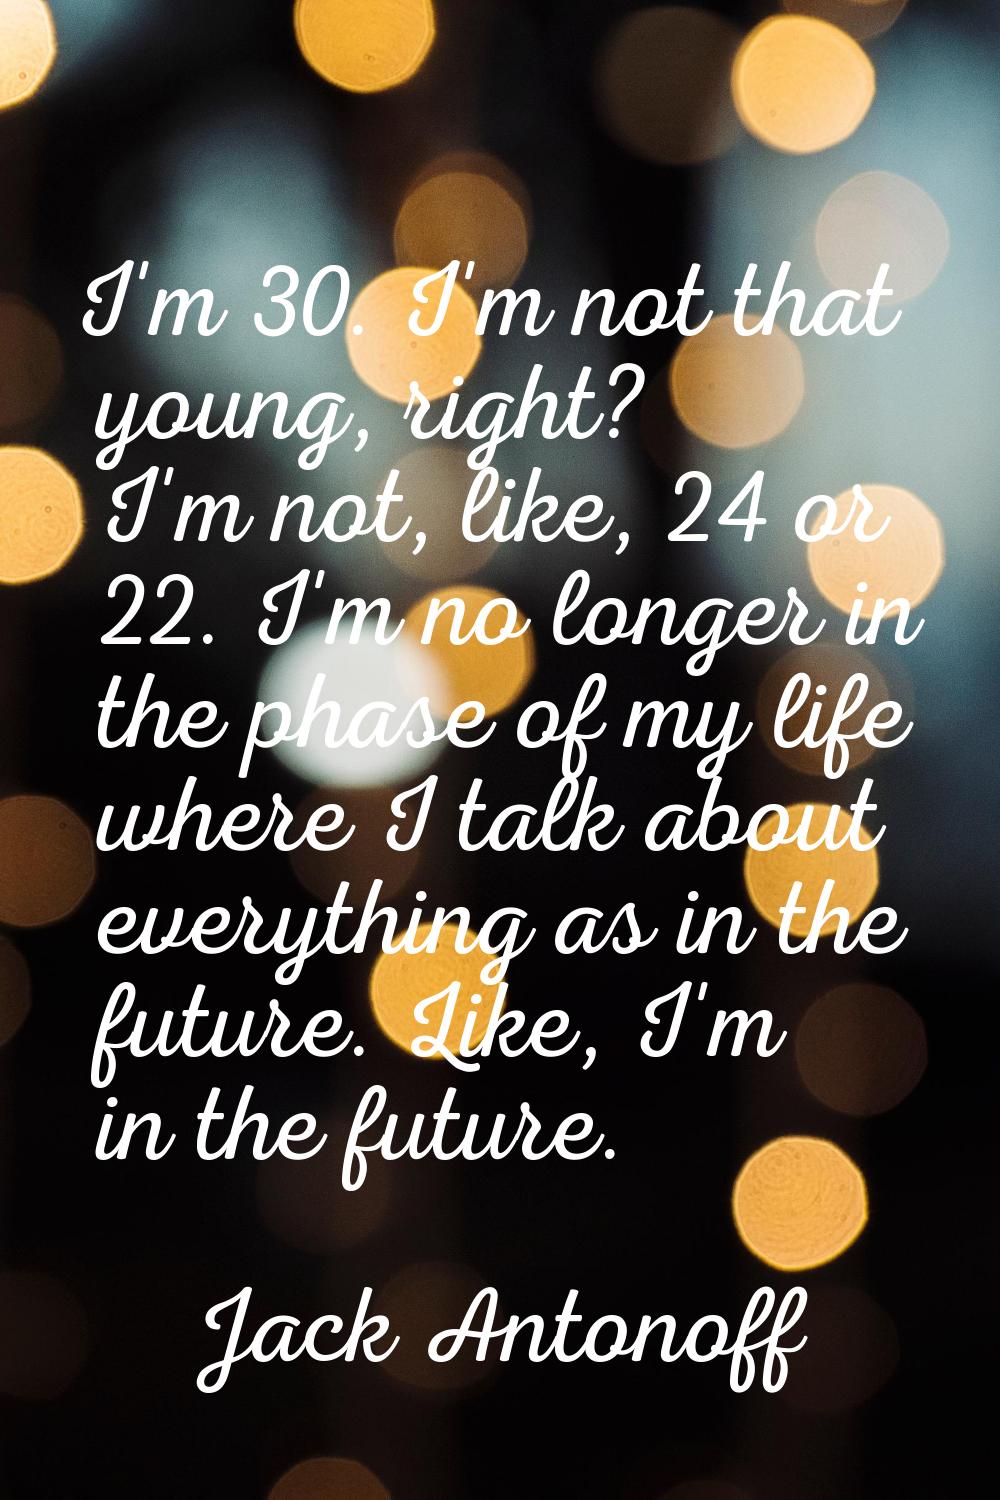 I'm 30. I'm not that young, right? I'm not, like, 24 or 22. I'm no longer in the phase of my life w